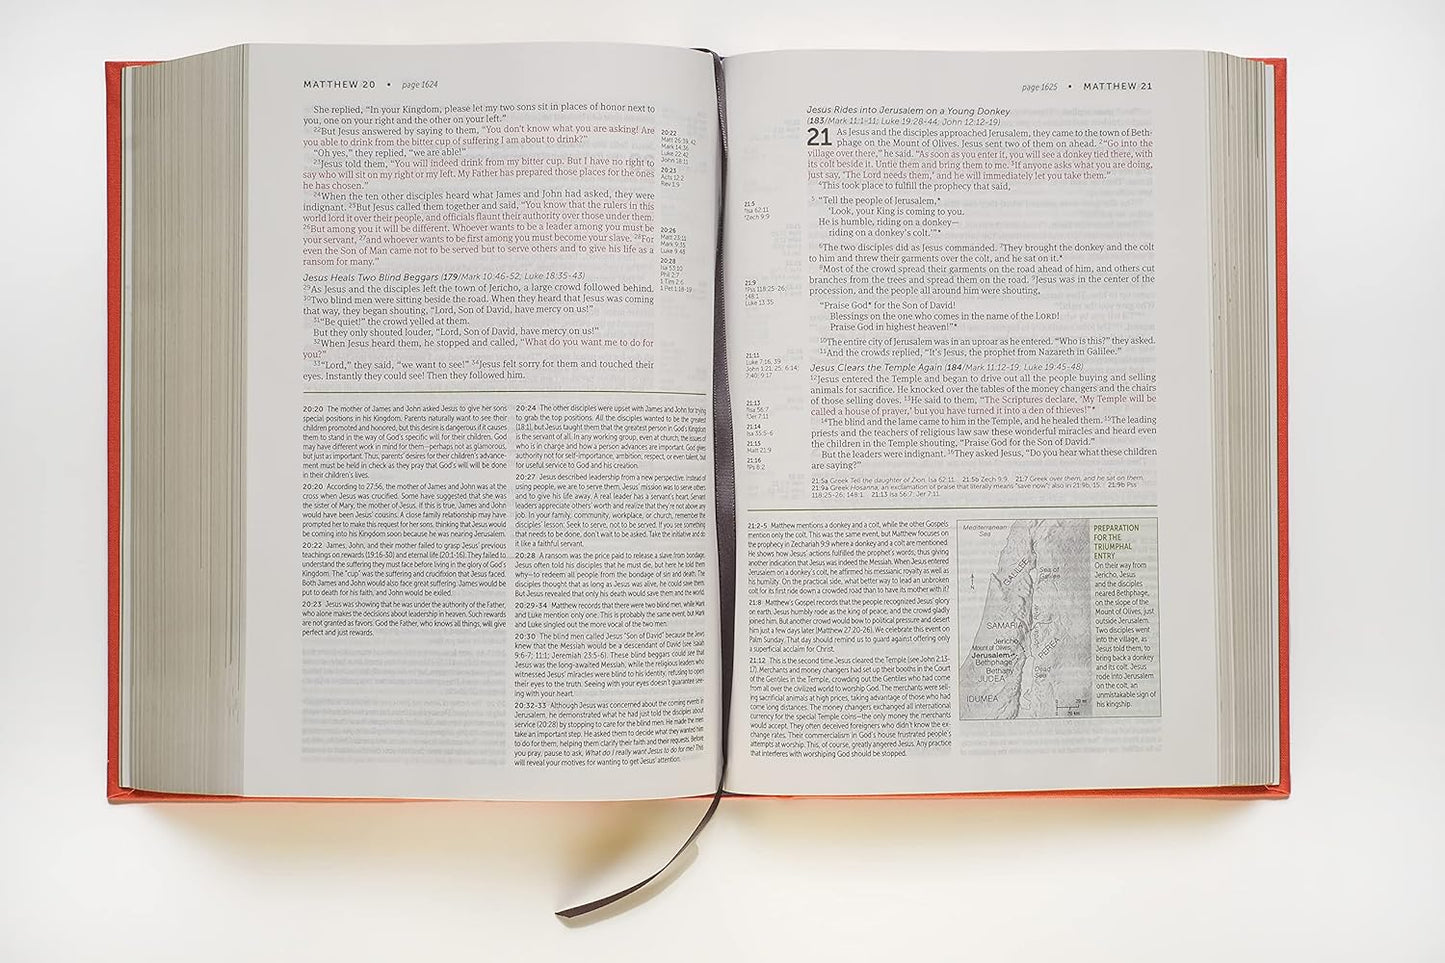 NLT Life Application Study Bible, Third Edition (Hardcover Cloth, Coral, Red Letter)